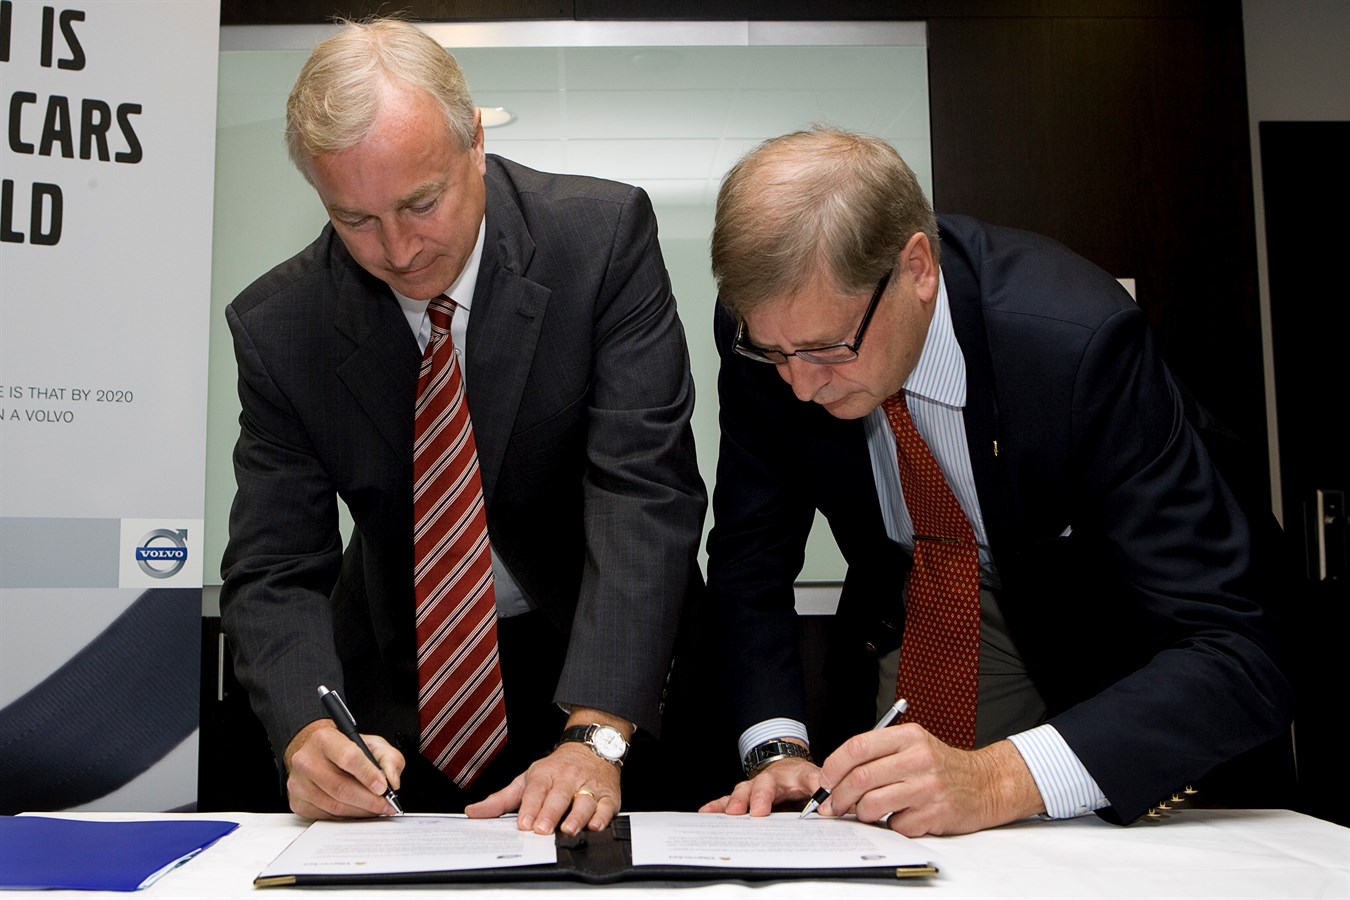 Volvo Cars’ President and CEO Fredrik Arp and the Swedish Road Administration’s Director General Ingemar Skogö signing declaration of intent.